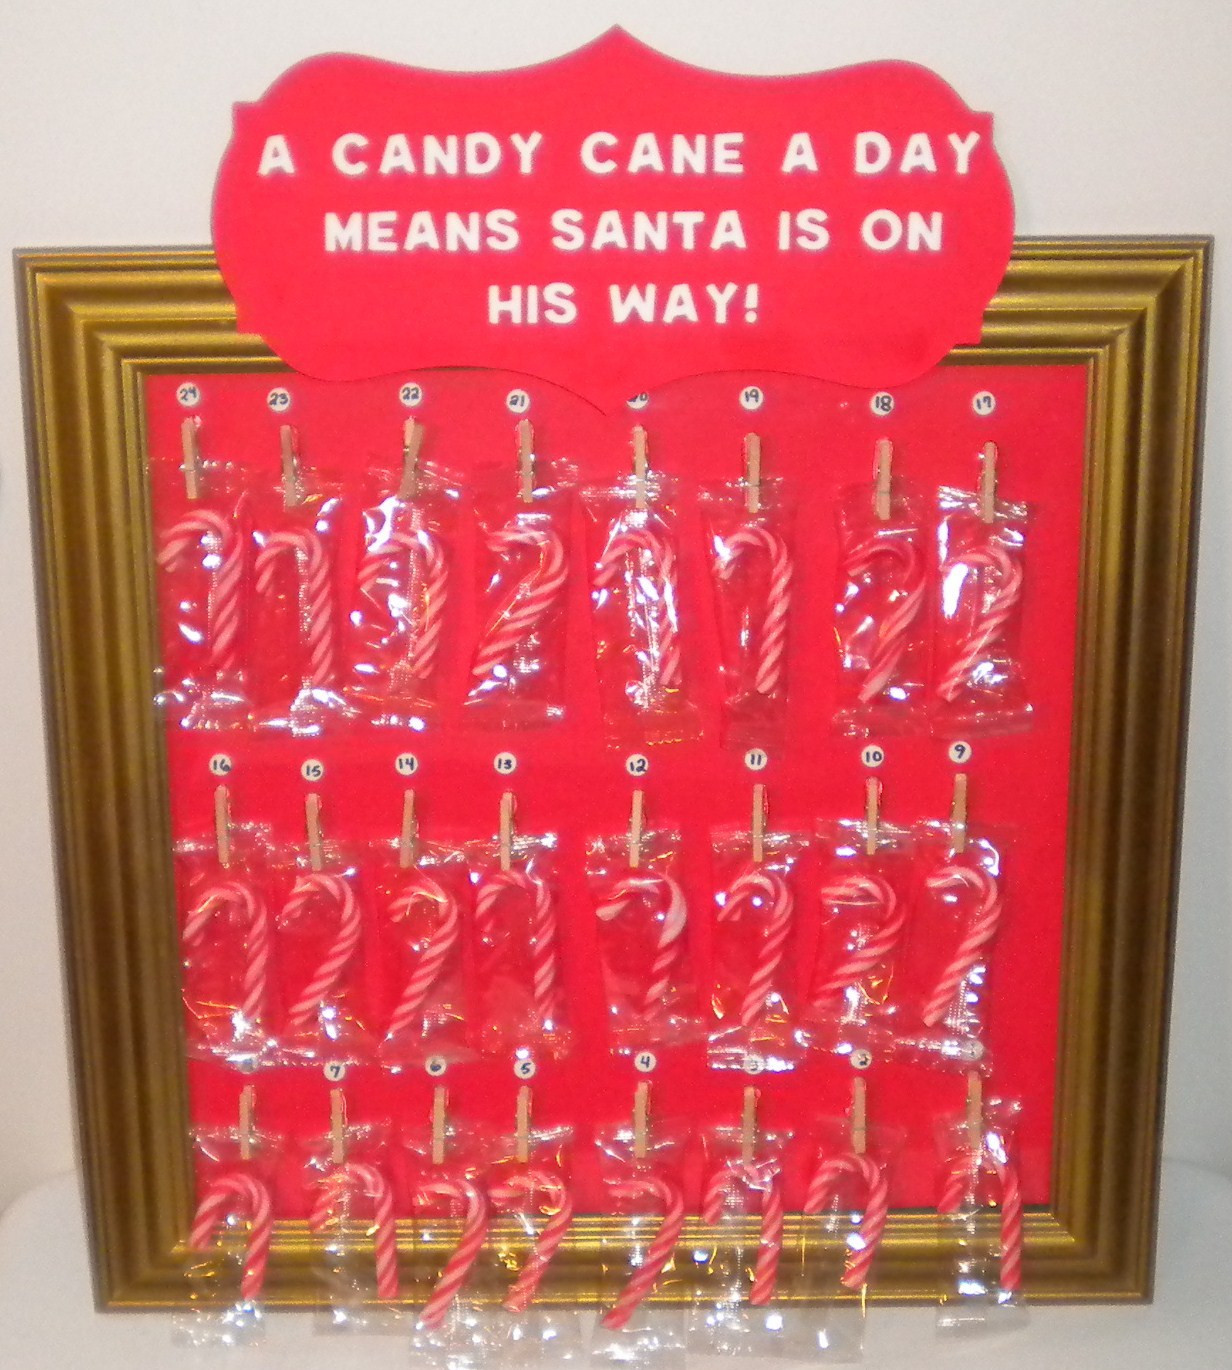 21 Ideas for Christmas Candy Calendars Most Popular Ideas of All Time